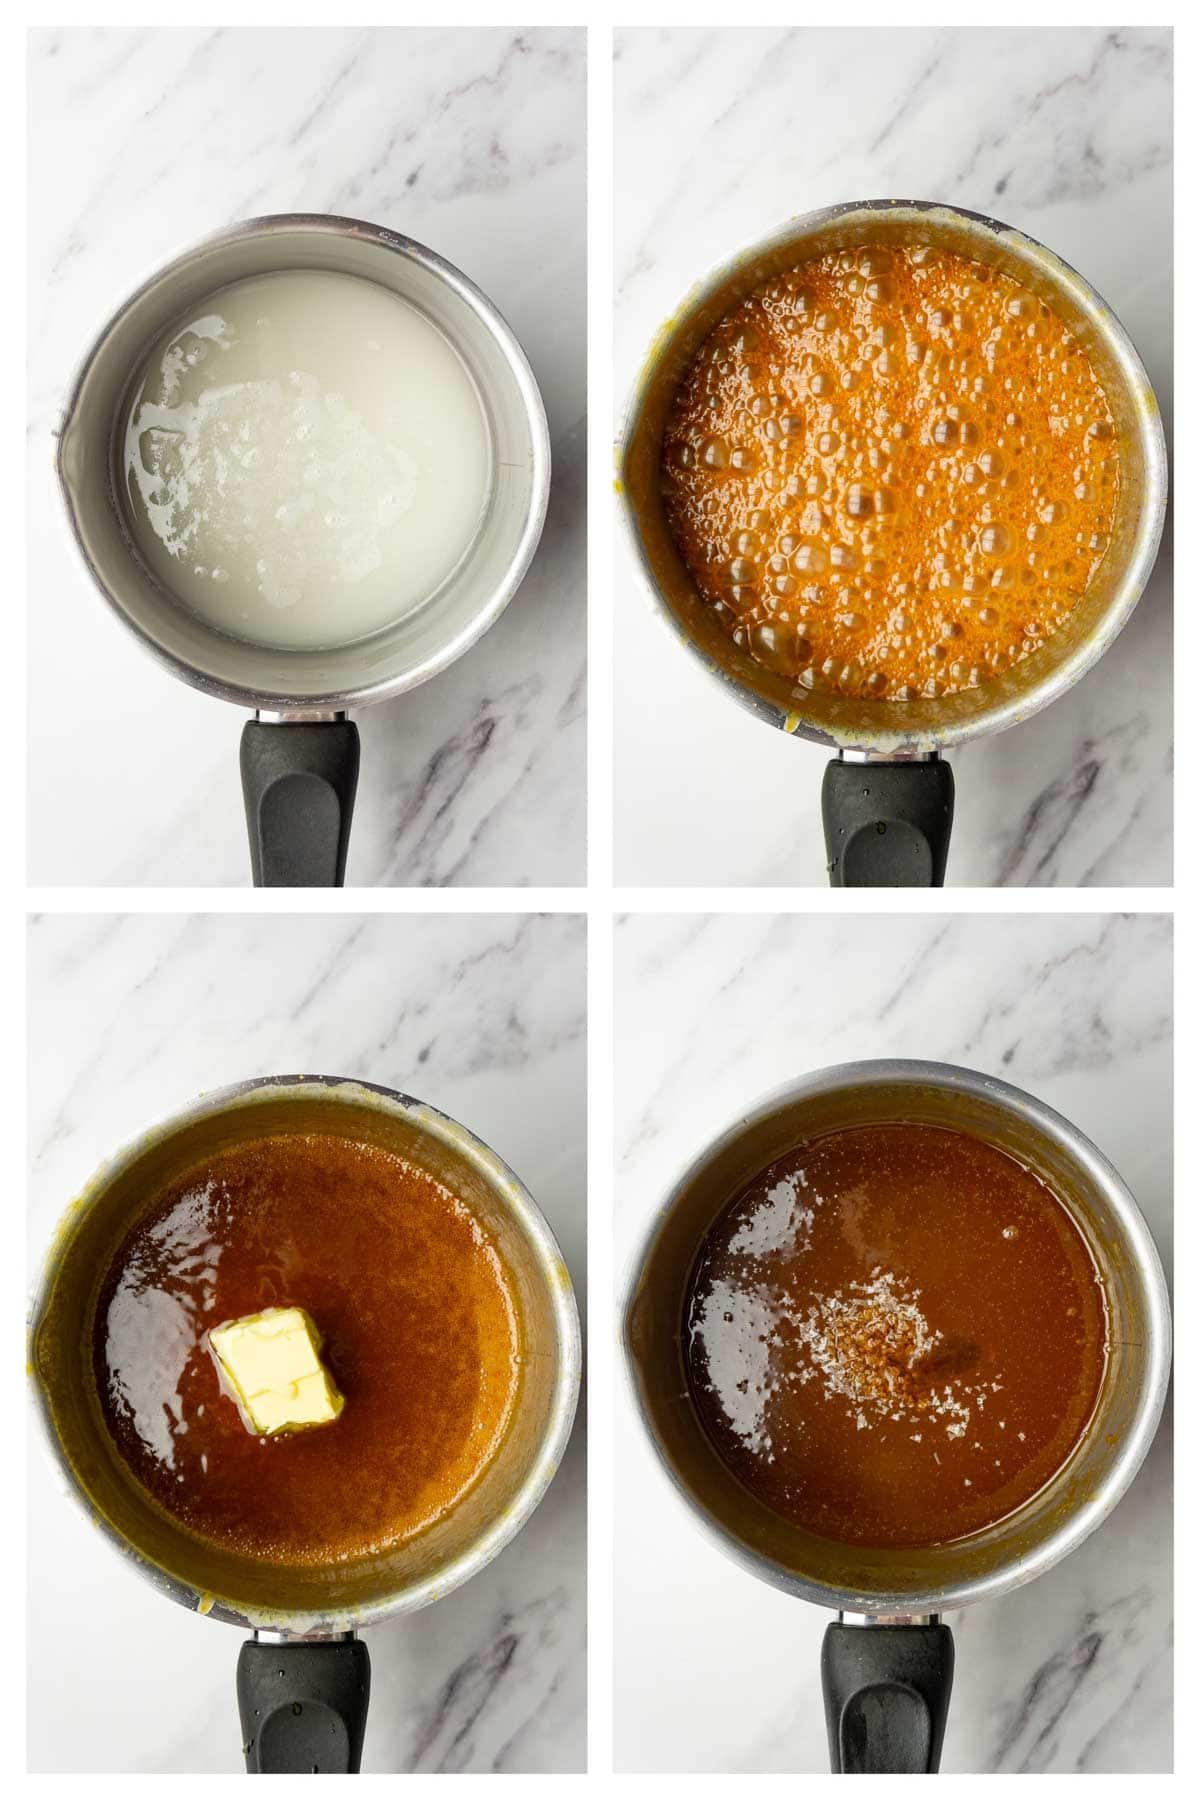 Collage showing step by step instructions to make homemade salted caramel sauce recipe.